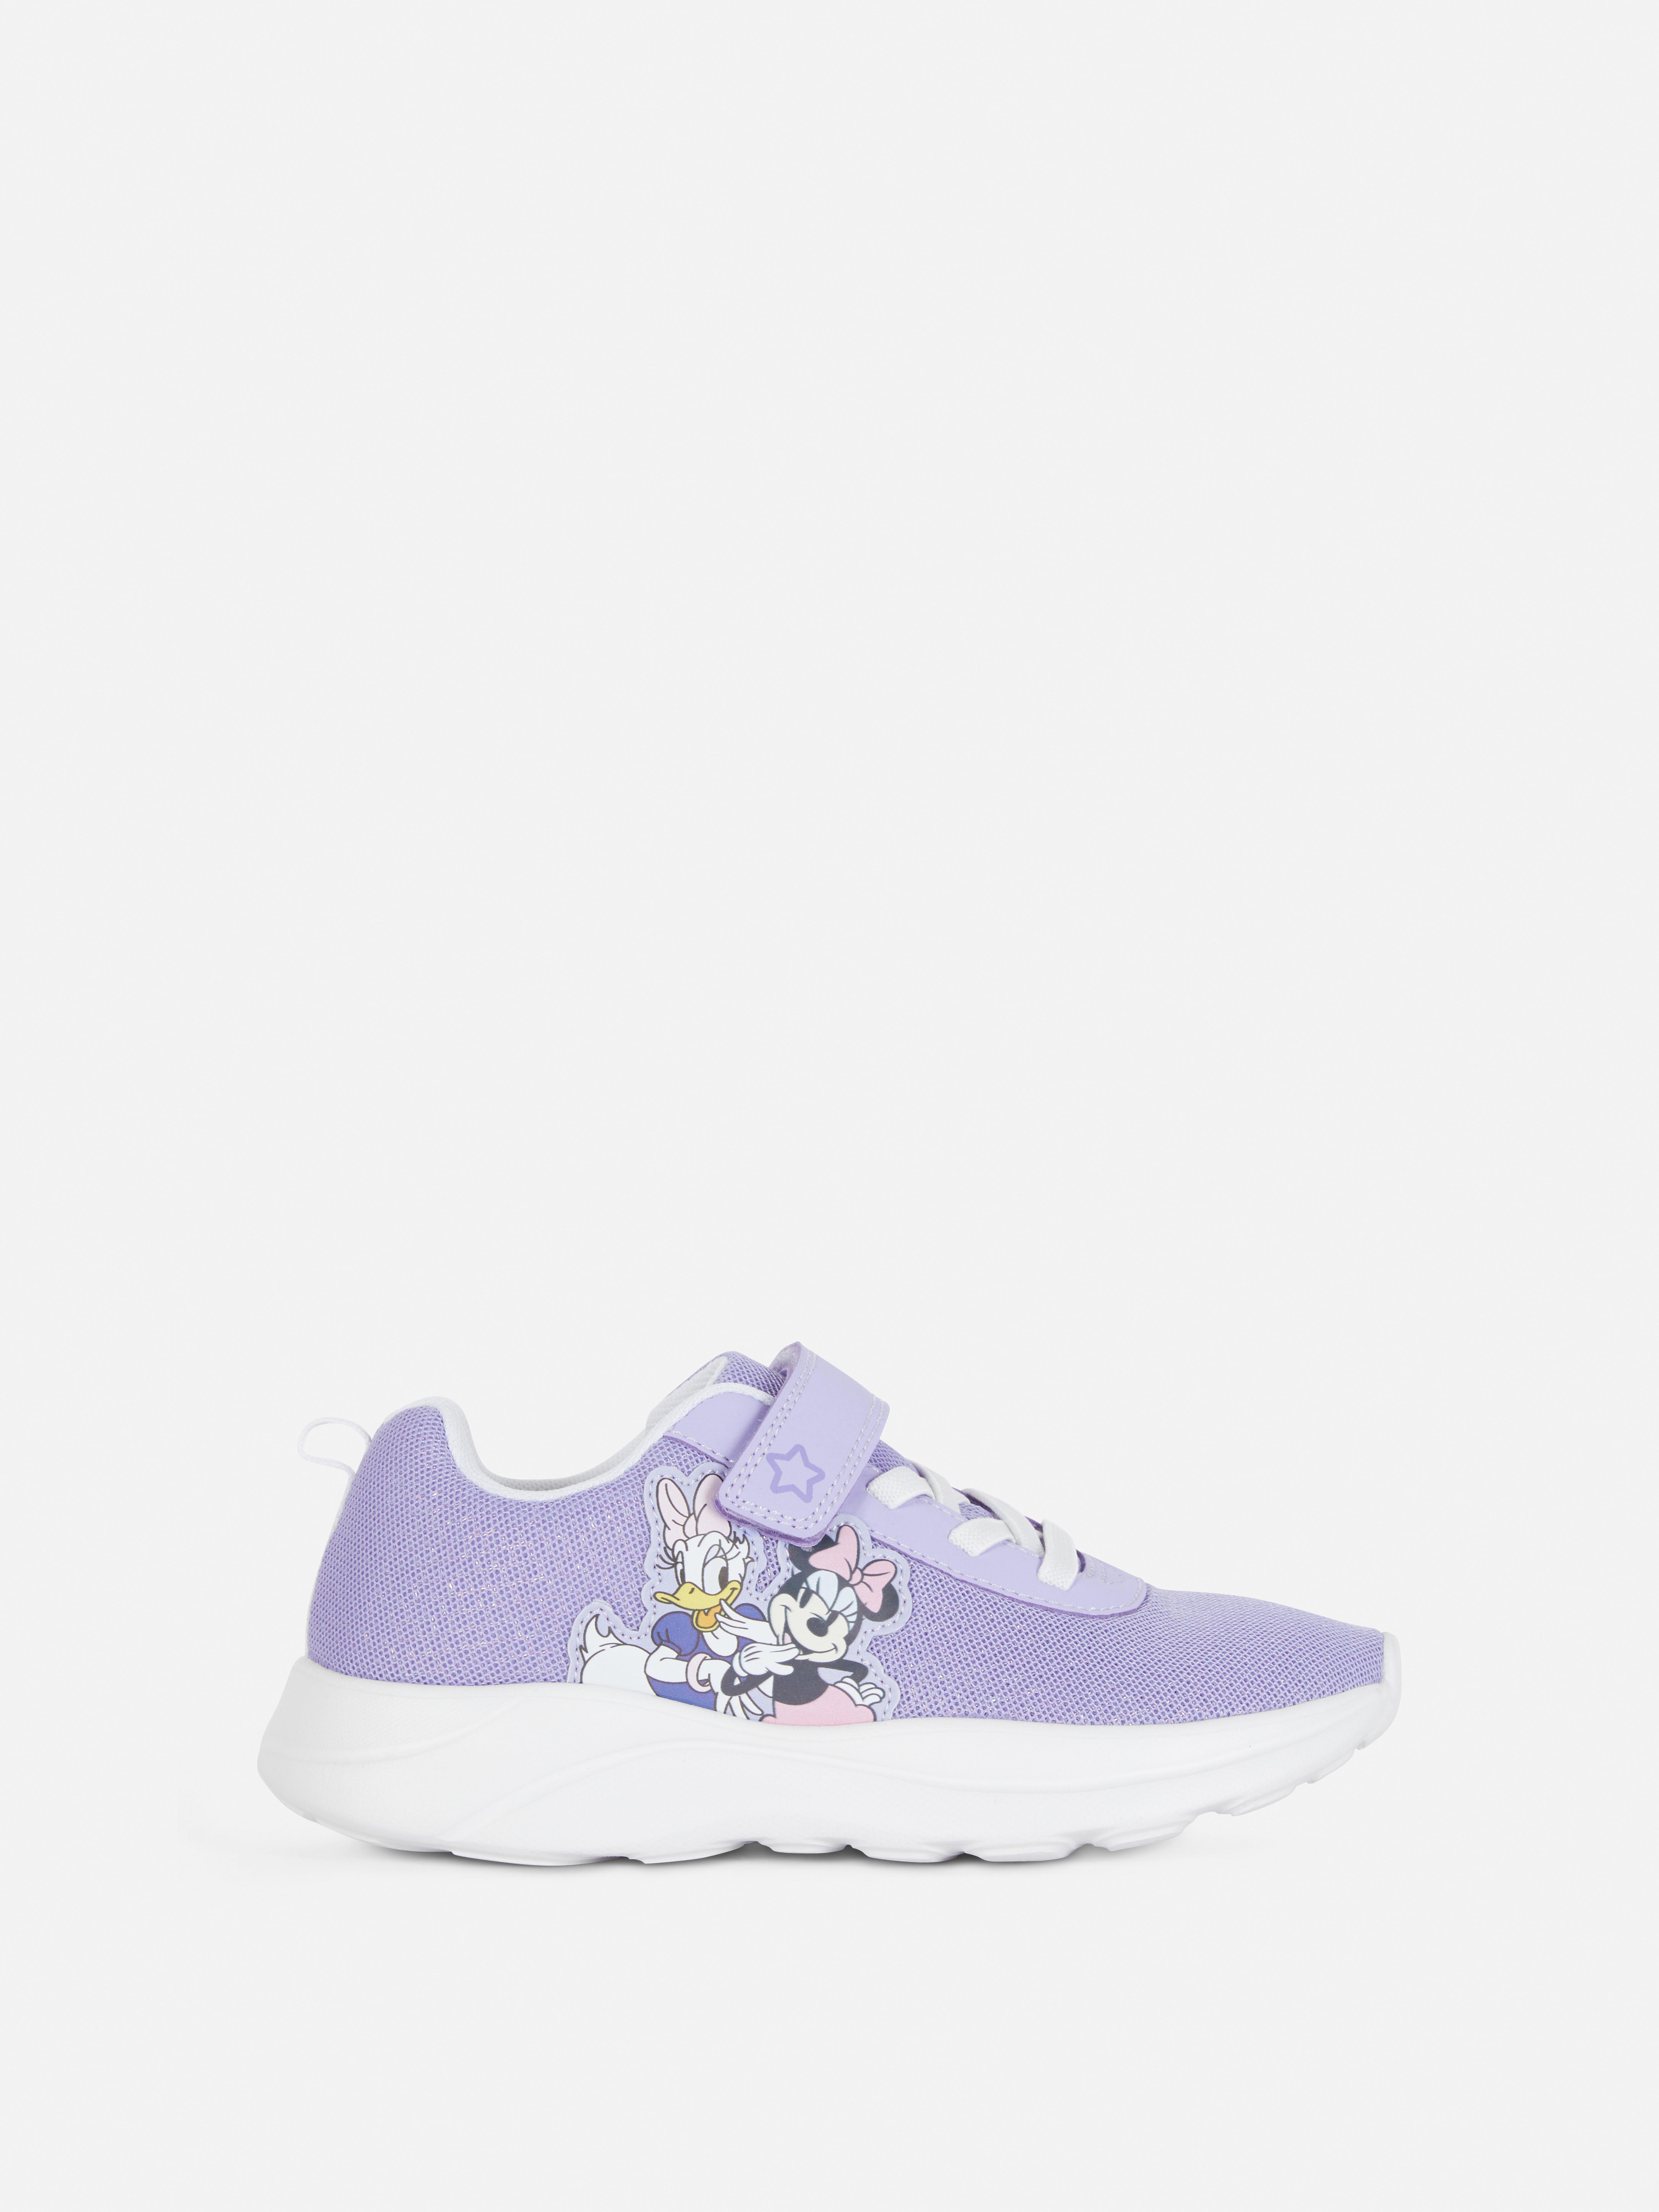 Disney’s Minnie Mouse and Daisy Duck Trainers